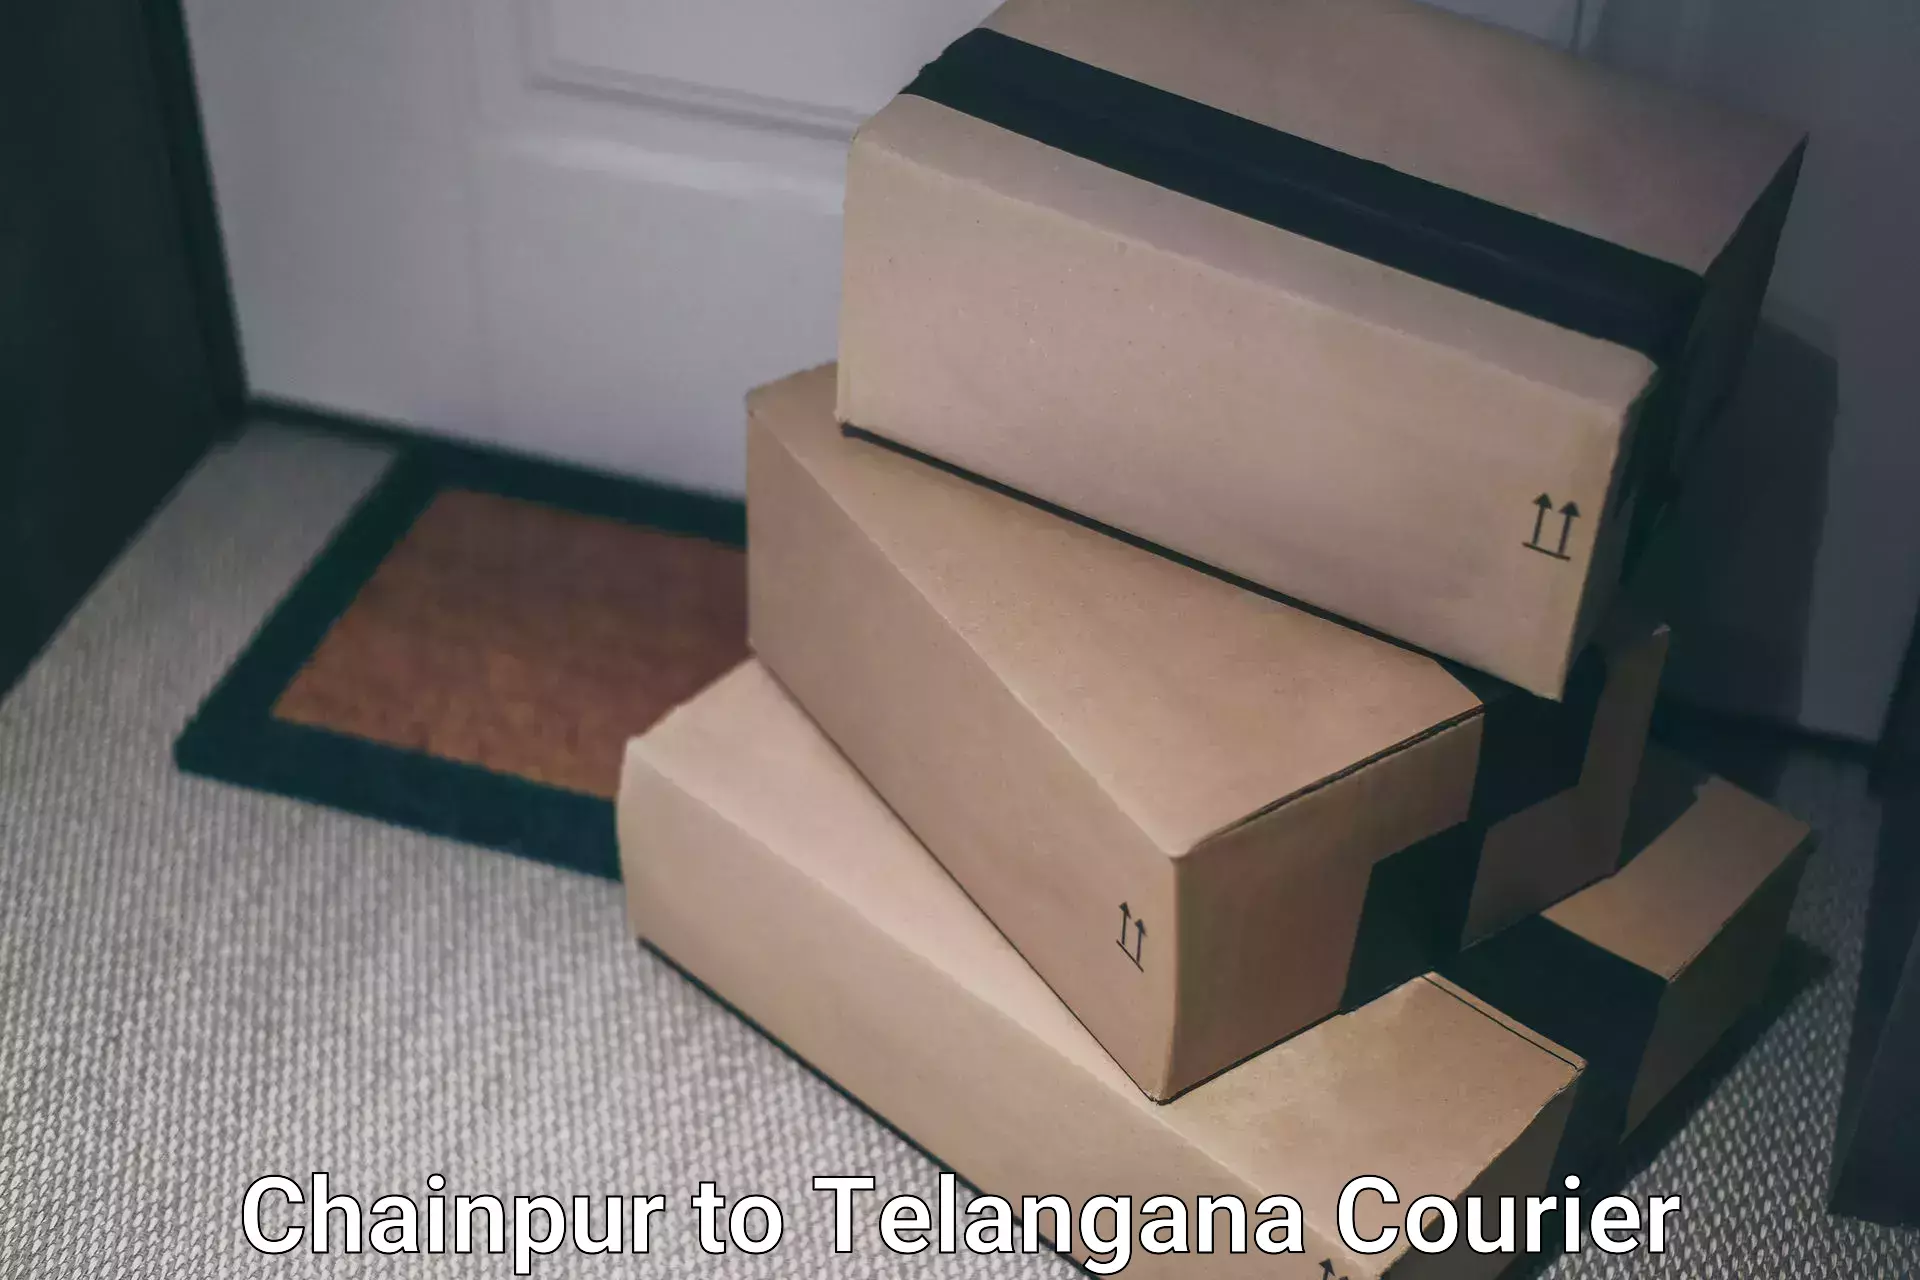 Efficient cargo services Chainpur to Bodhan